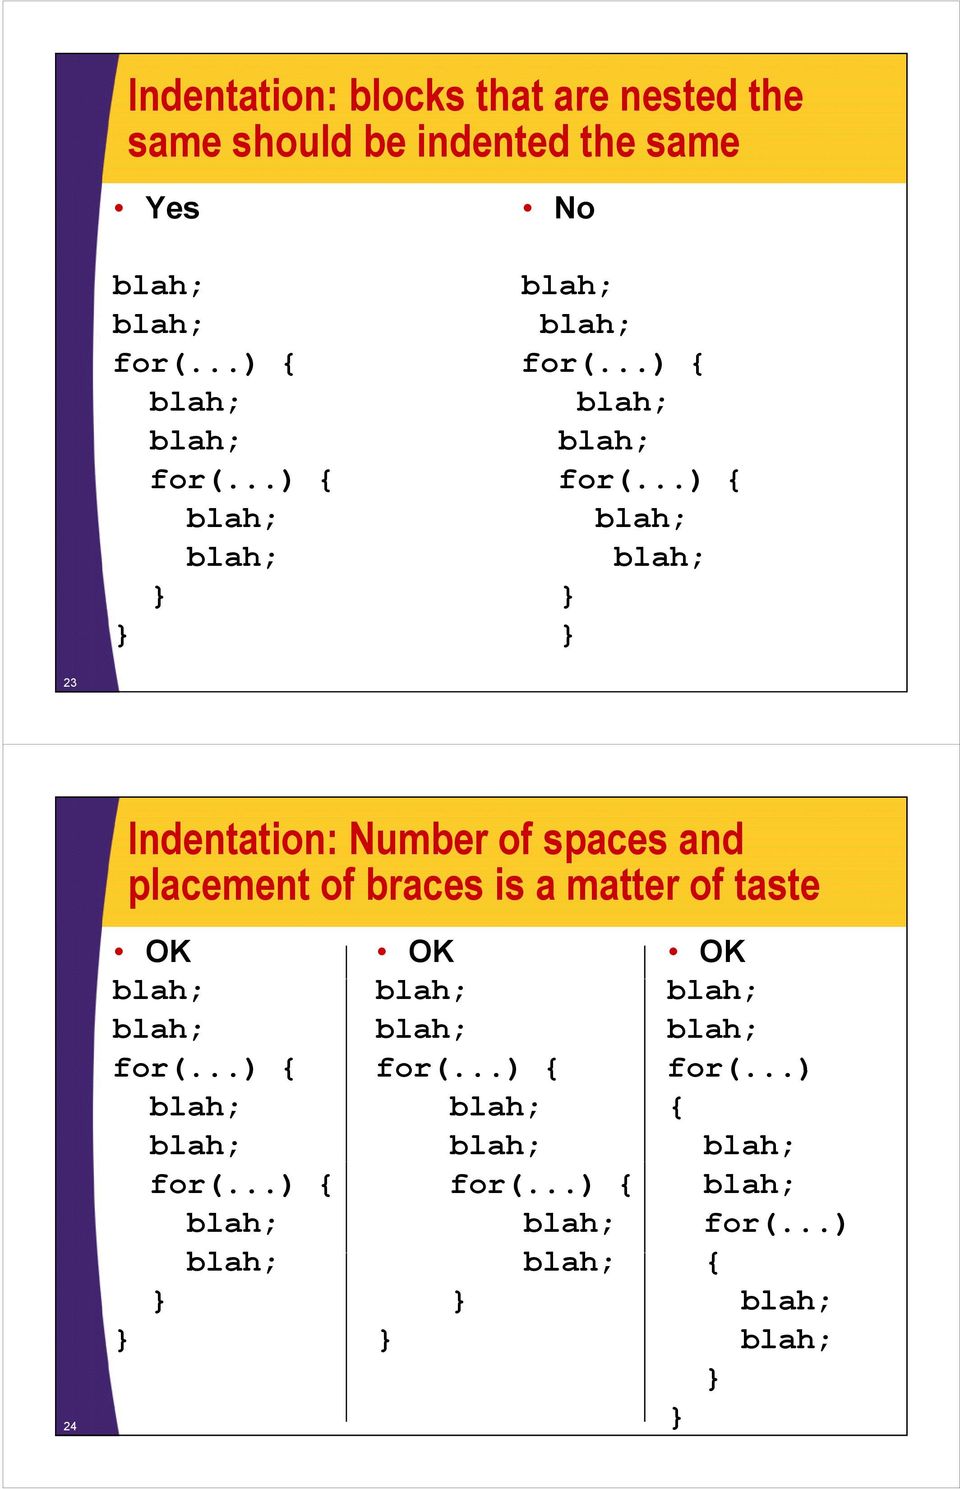 Indentation: Number of spaces and placement of